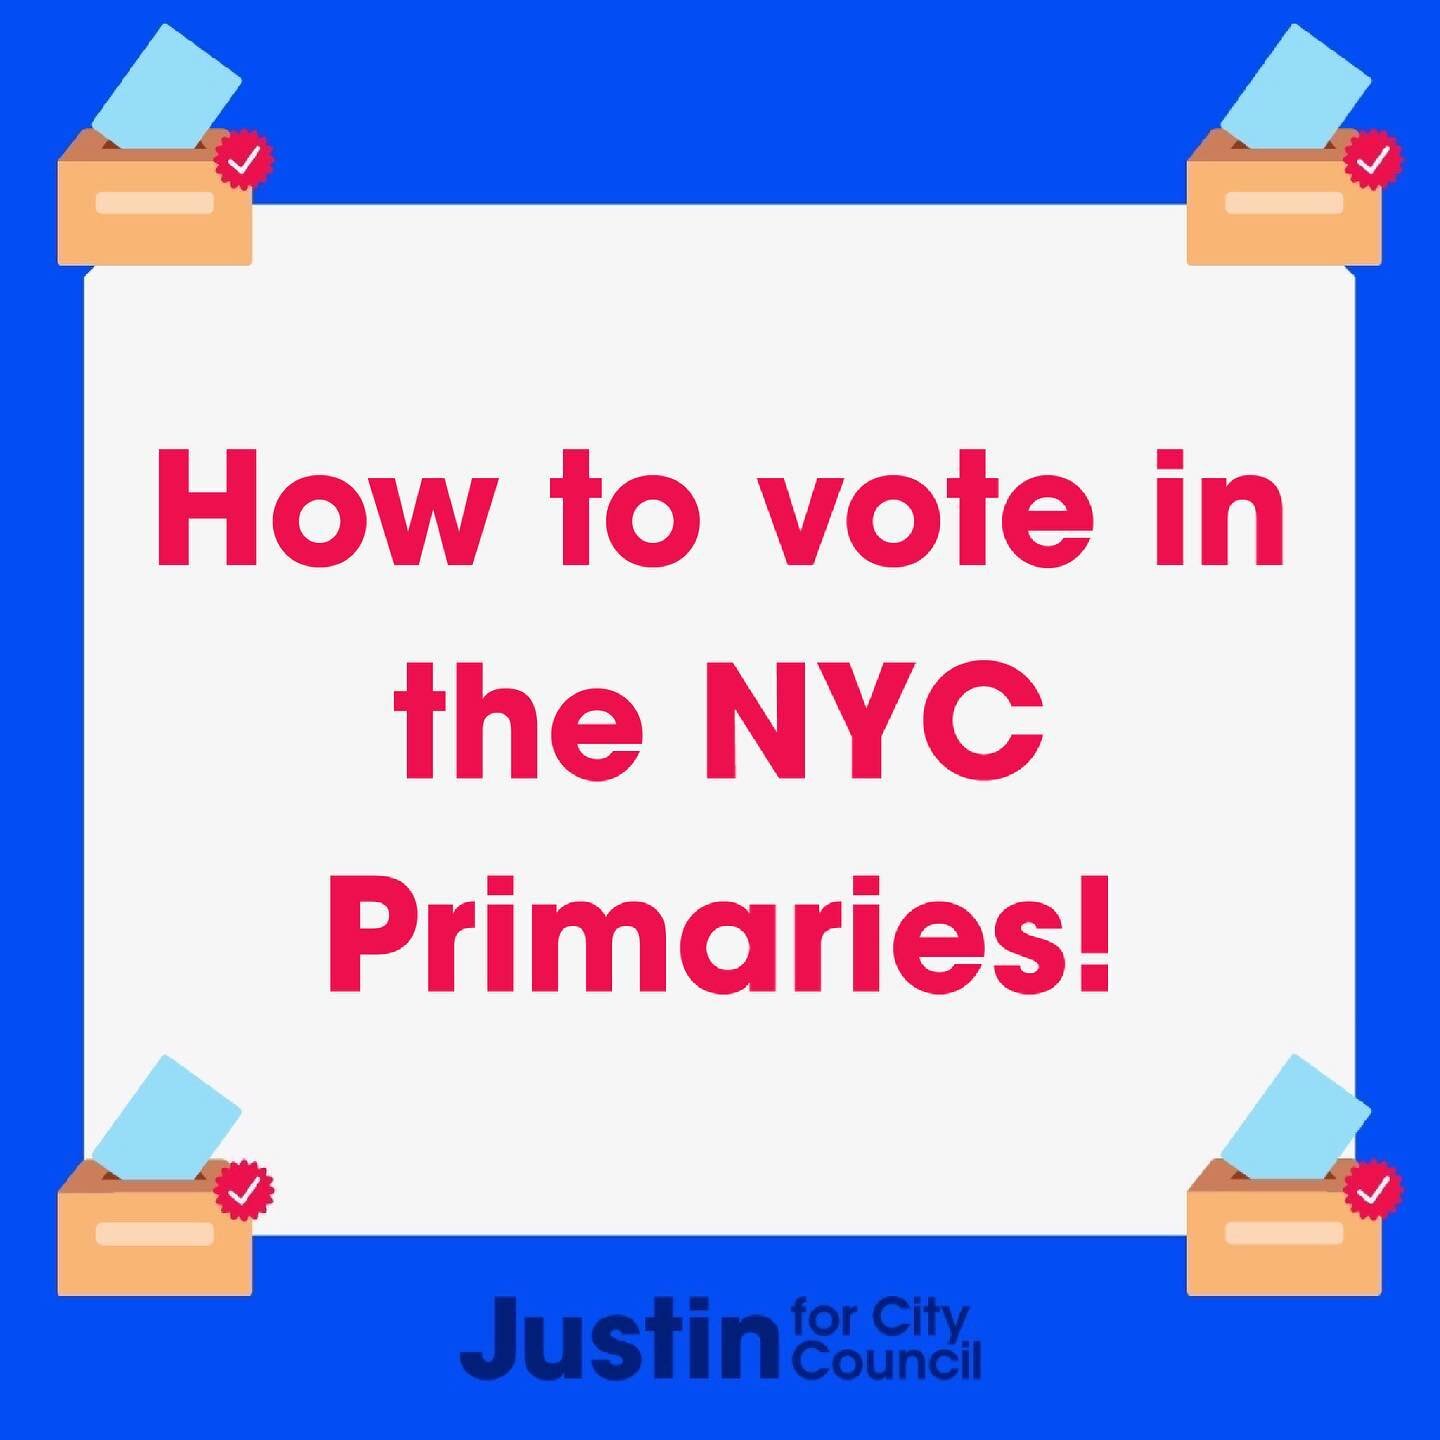 Are you planning on voting in the upcoming primary? There are plenty of ways to do so. Keep a look out for more in our series on how to vote using the different methods available!

#Together39 #KrebsForCouncil #JustinKrebs #Progressive #CityCouncil #